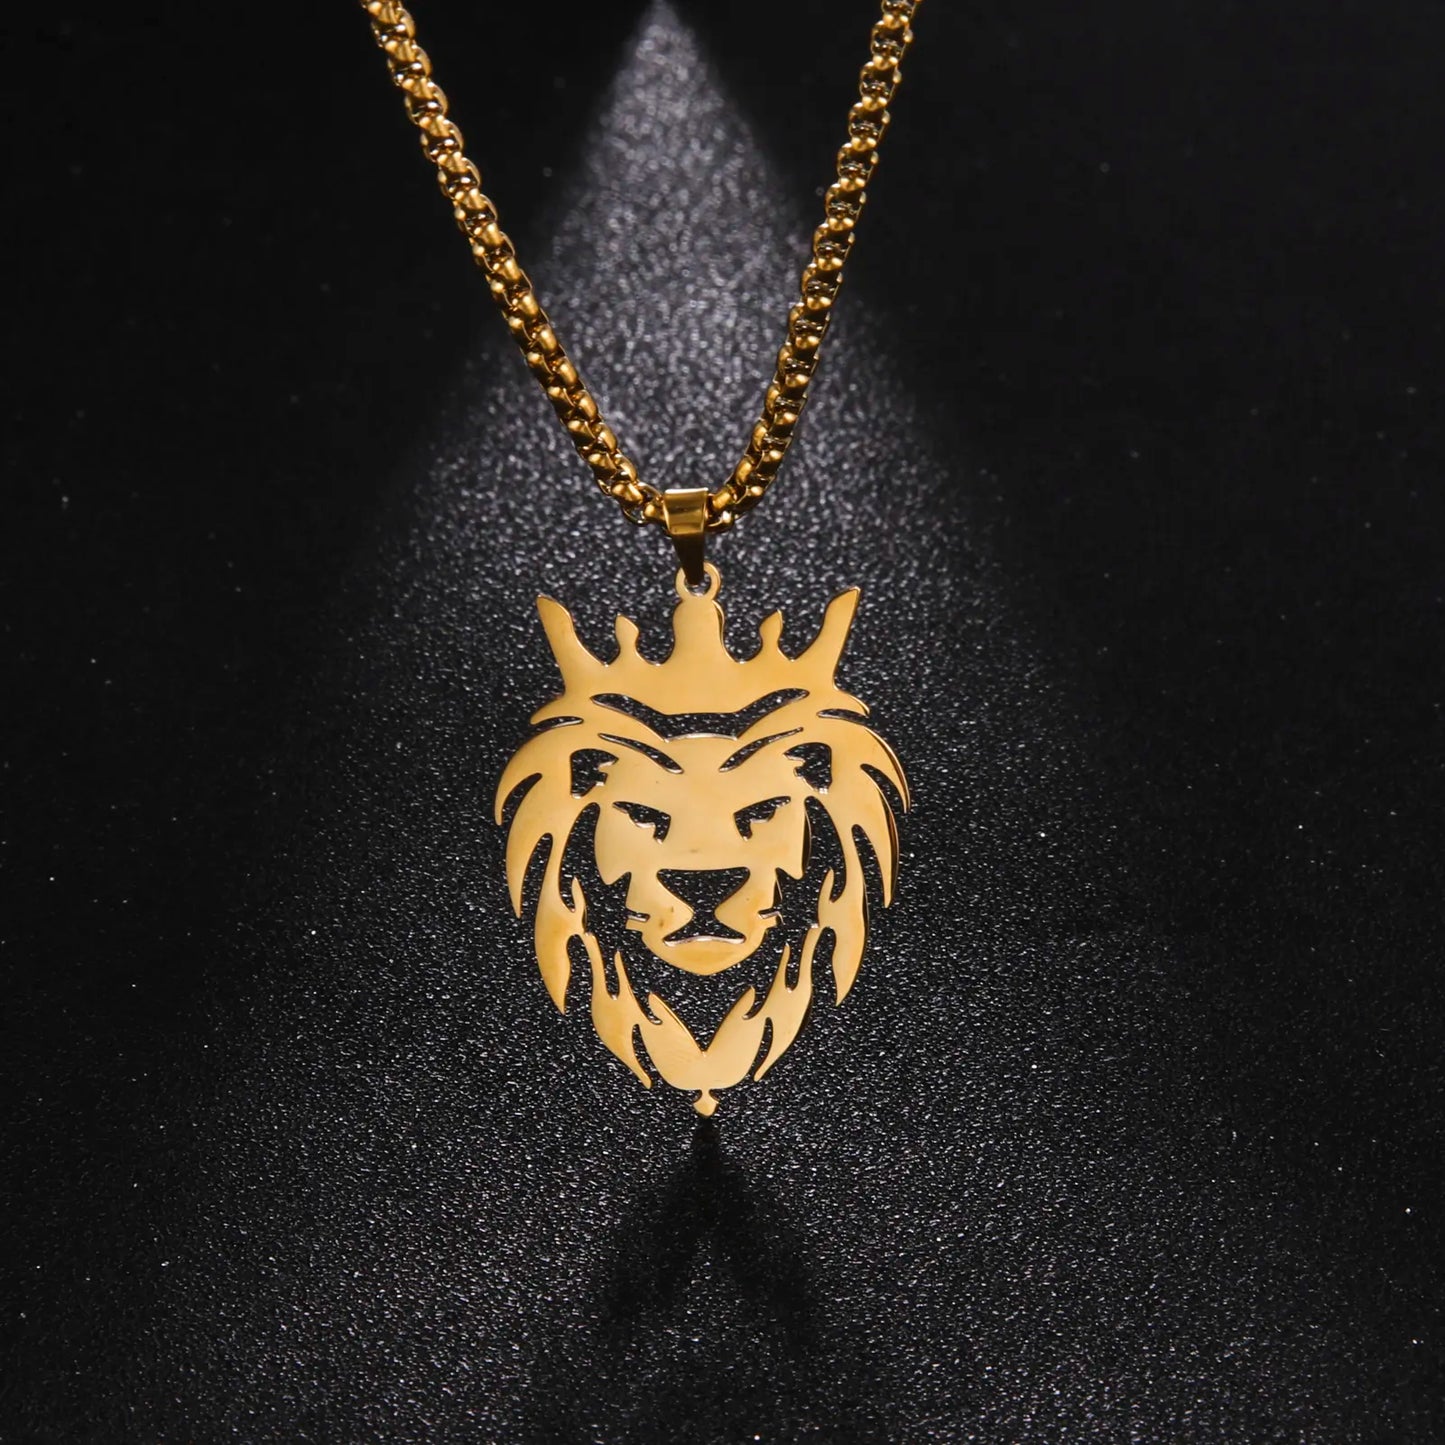 My Shape Lion with King Crown Necklaces for Men Boys Stainless Steel Punk Animal Pendant Men's Box Chain Choker Fashion Jewelry